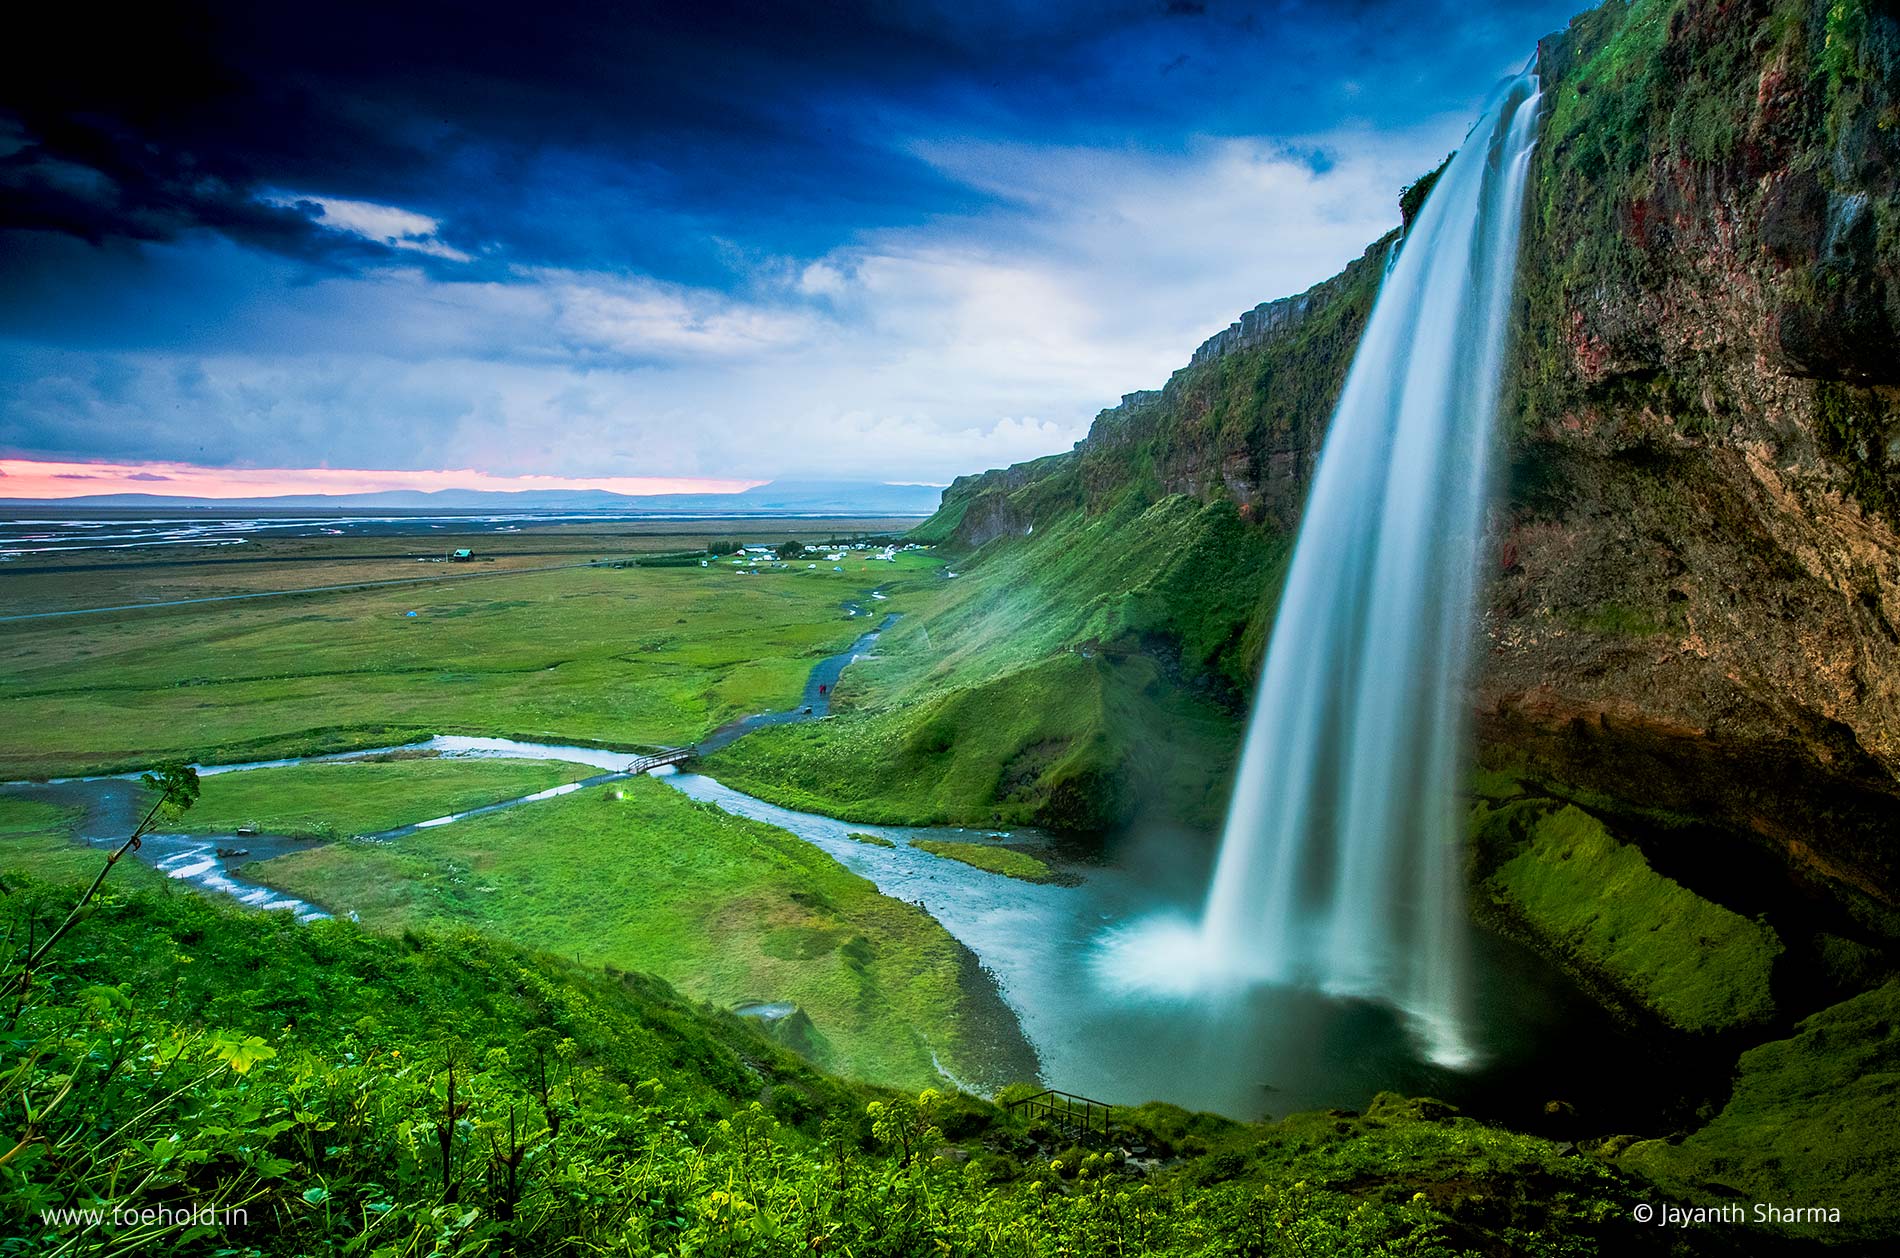 iceland tour packages from australia